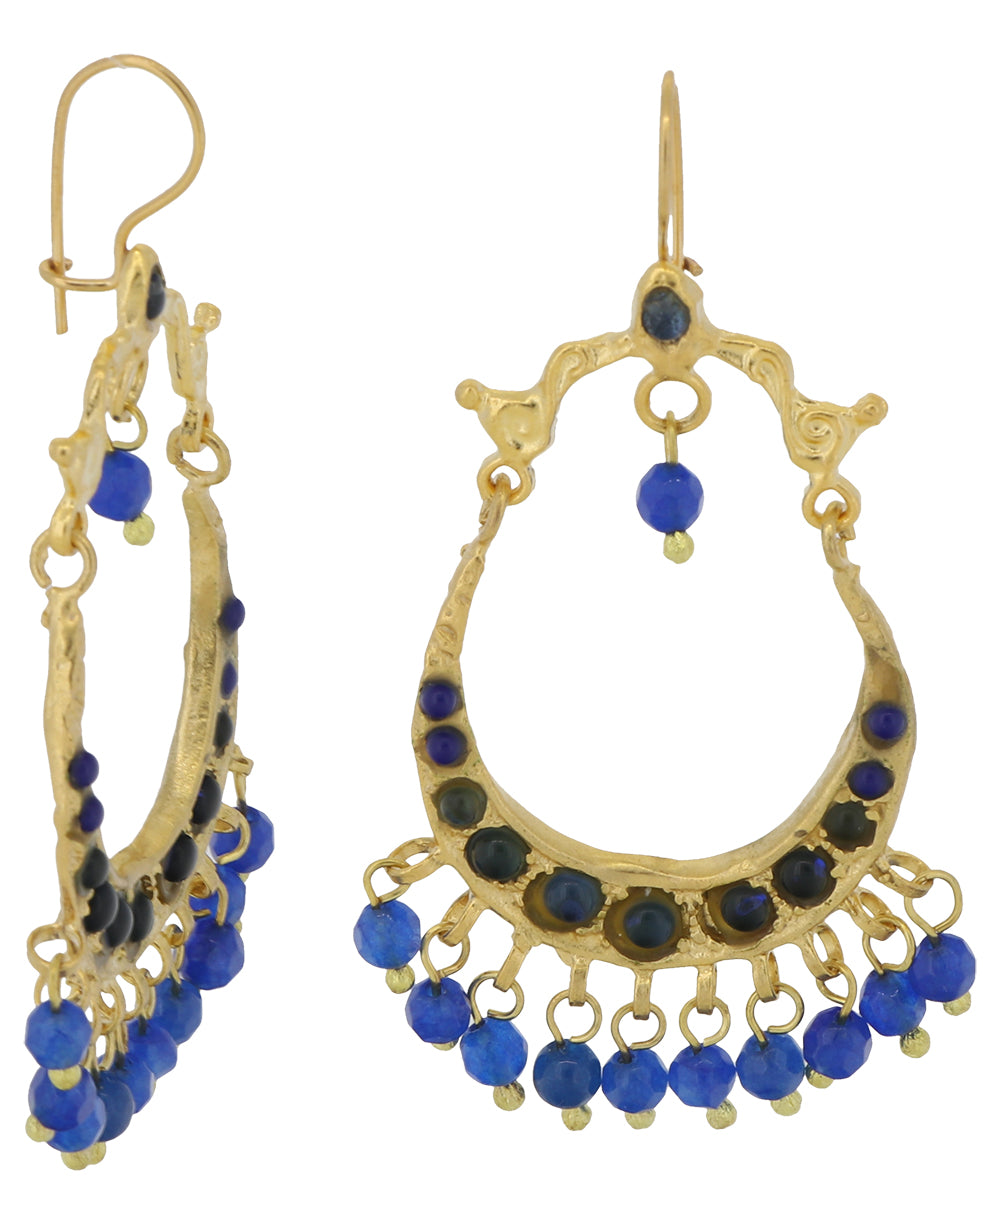 Dangling blue and gold earrings, gold plated brass, hook closure